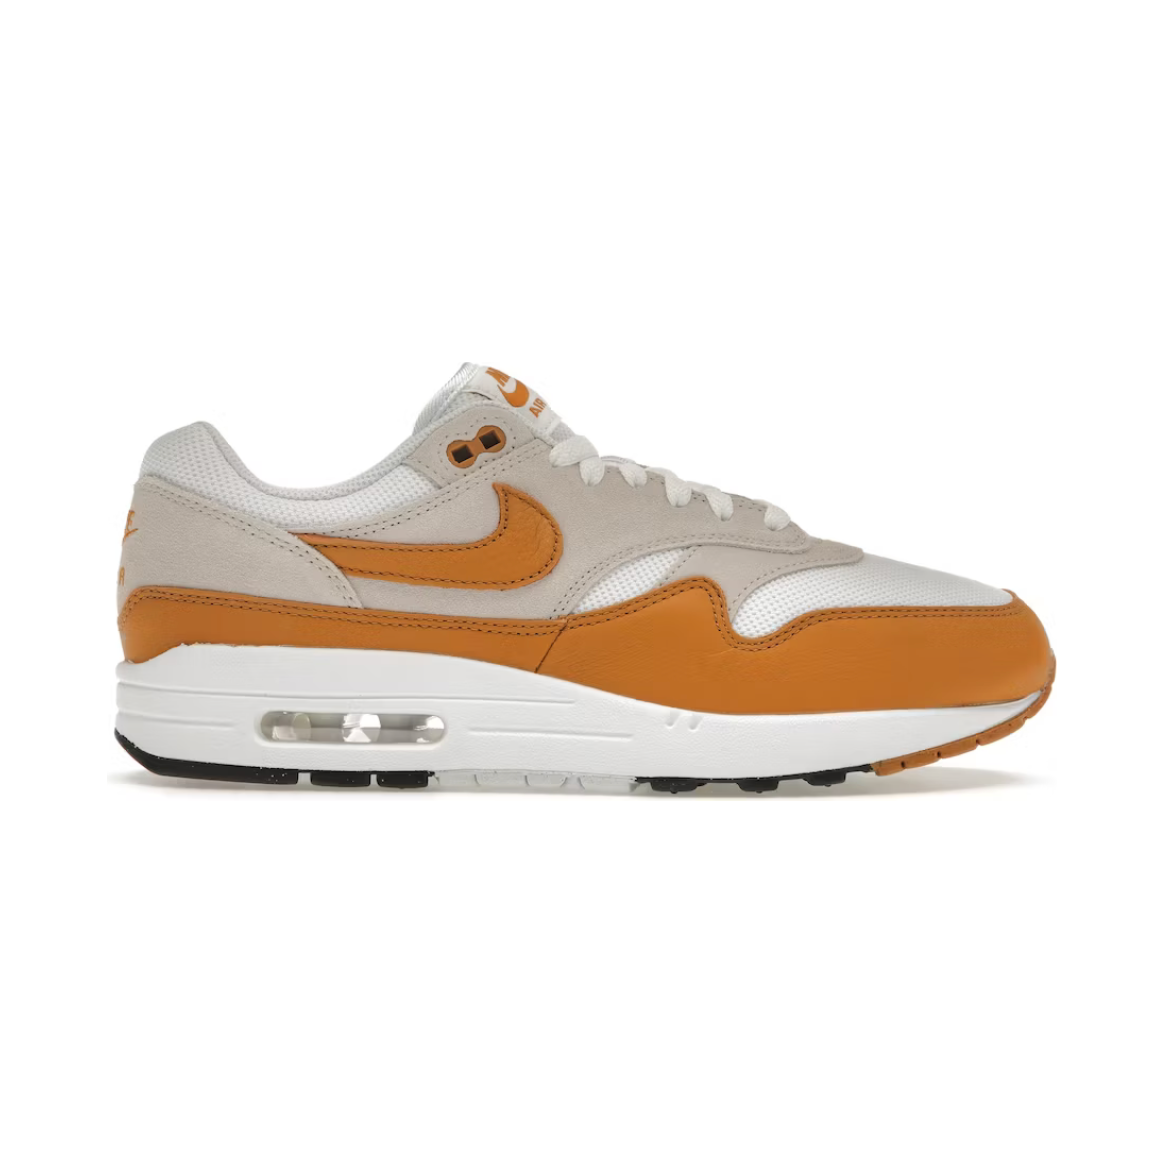 Nike Air Max 1 Bronze by Nike from £55.00